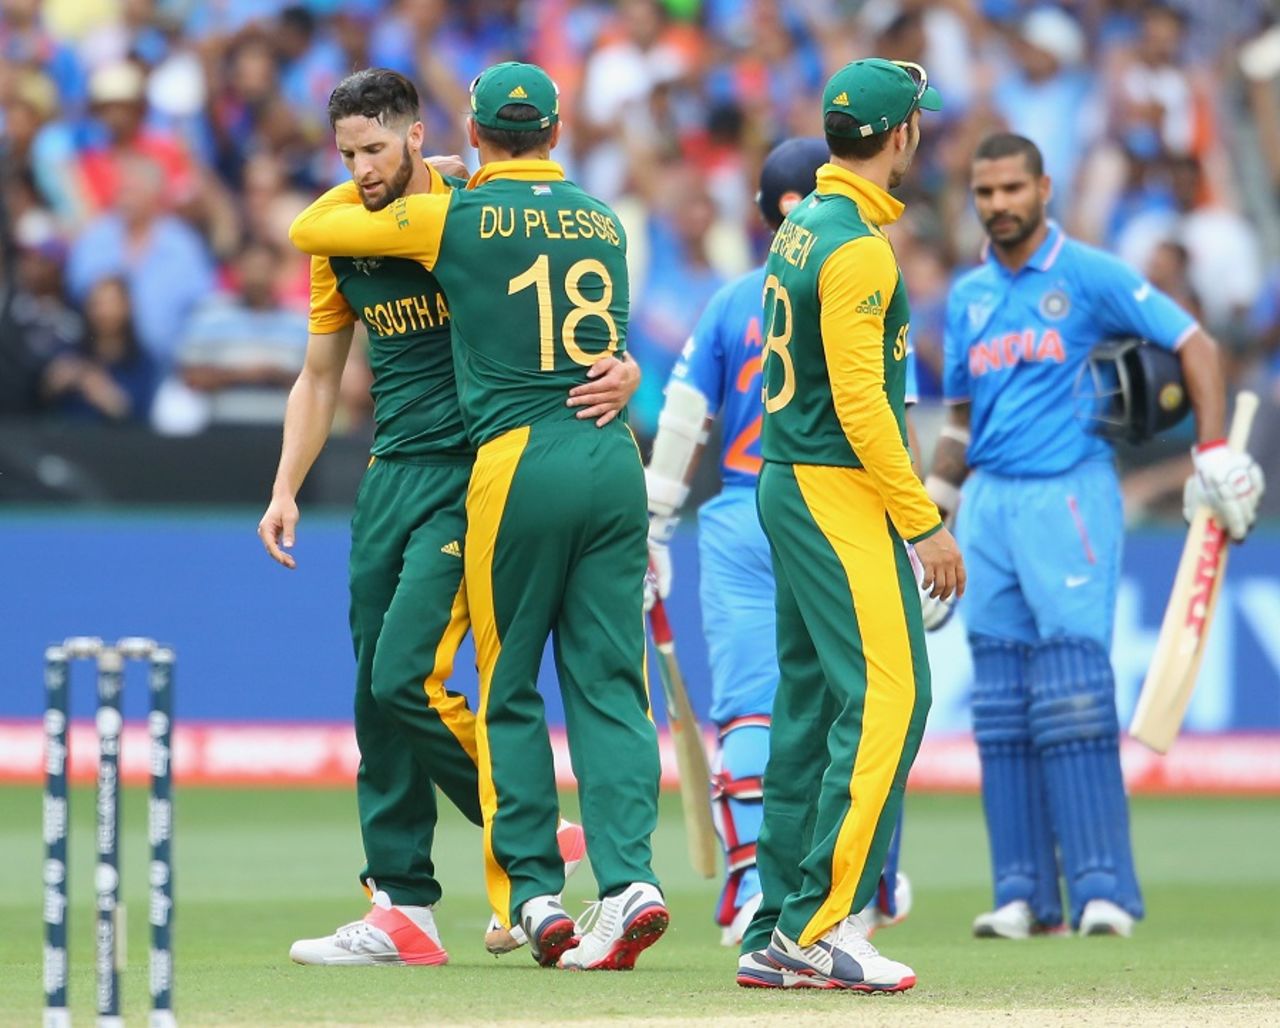 Wayne Parnell is congratulated by Faf du Plessis on the wicket of Shikhar Dhawan, India v South Africa, World Cup 2015, Group B, Melbourne, February 22, 2015